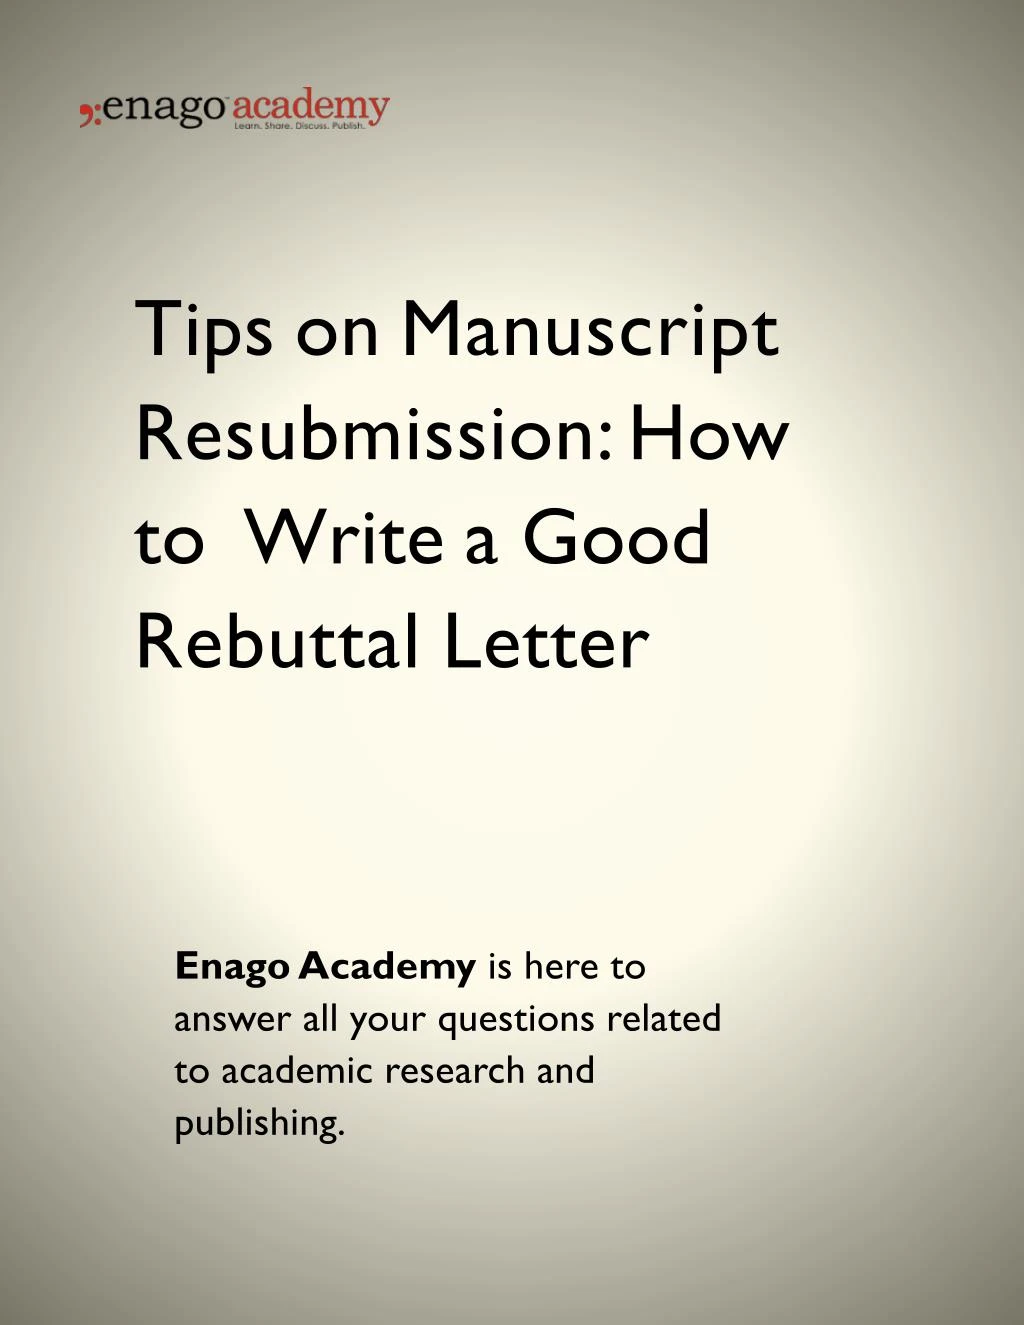 tips on manuscript resubmission how to write